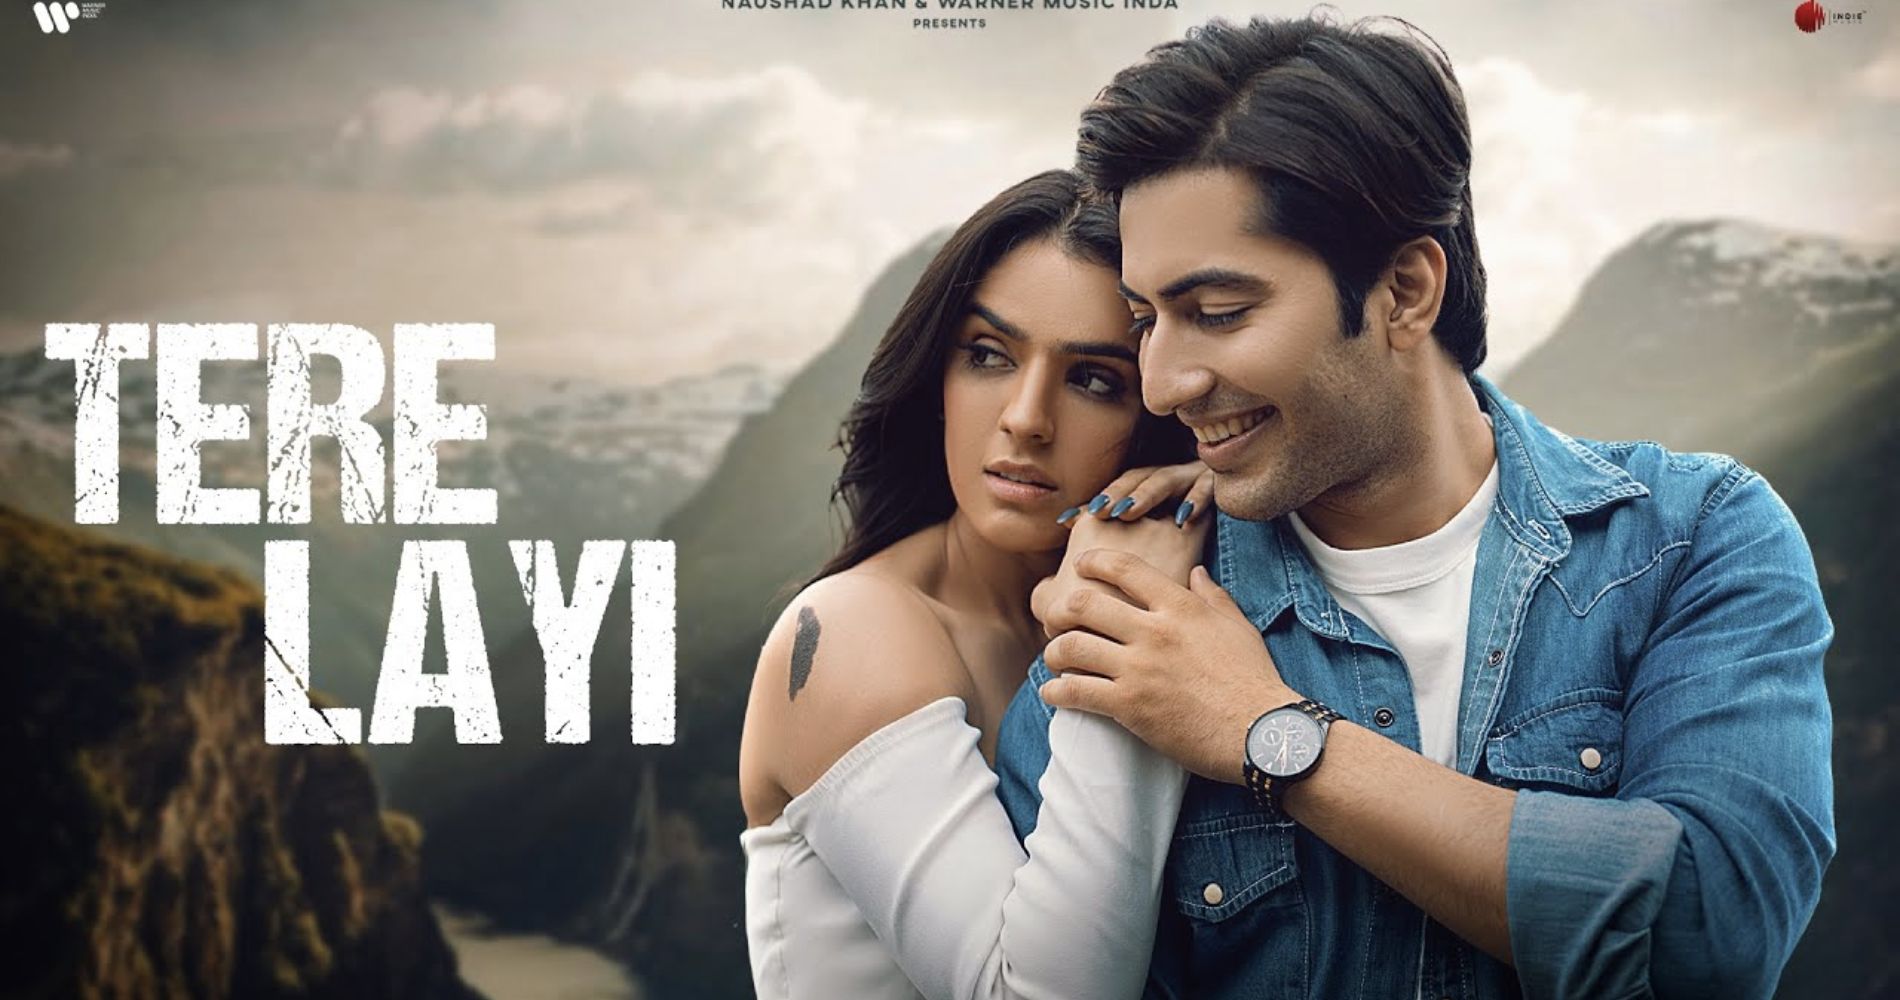 Neeti Mohan is back with a love anthem "Tere Layi"